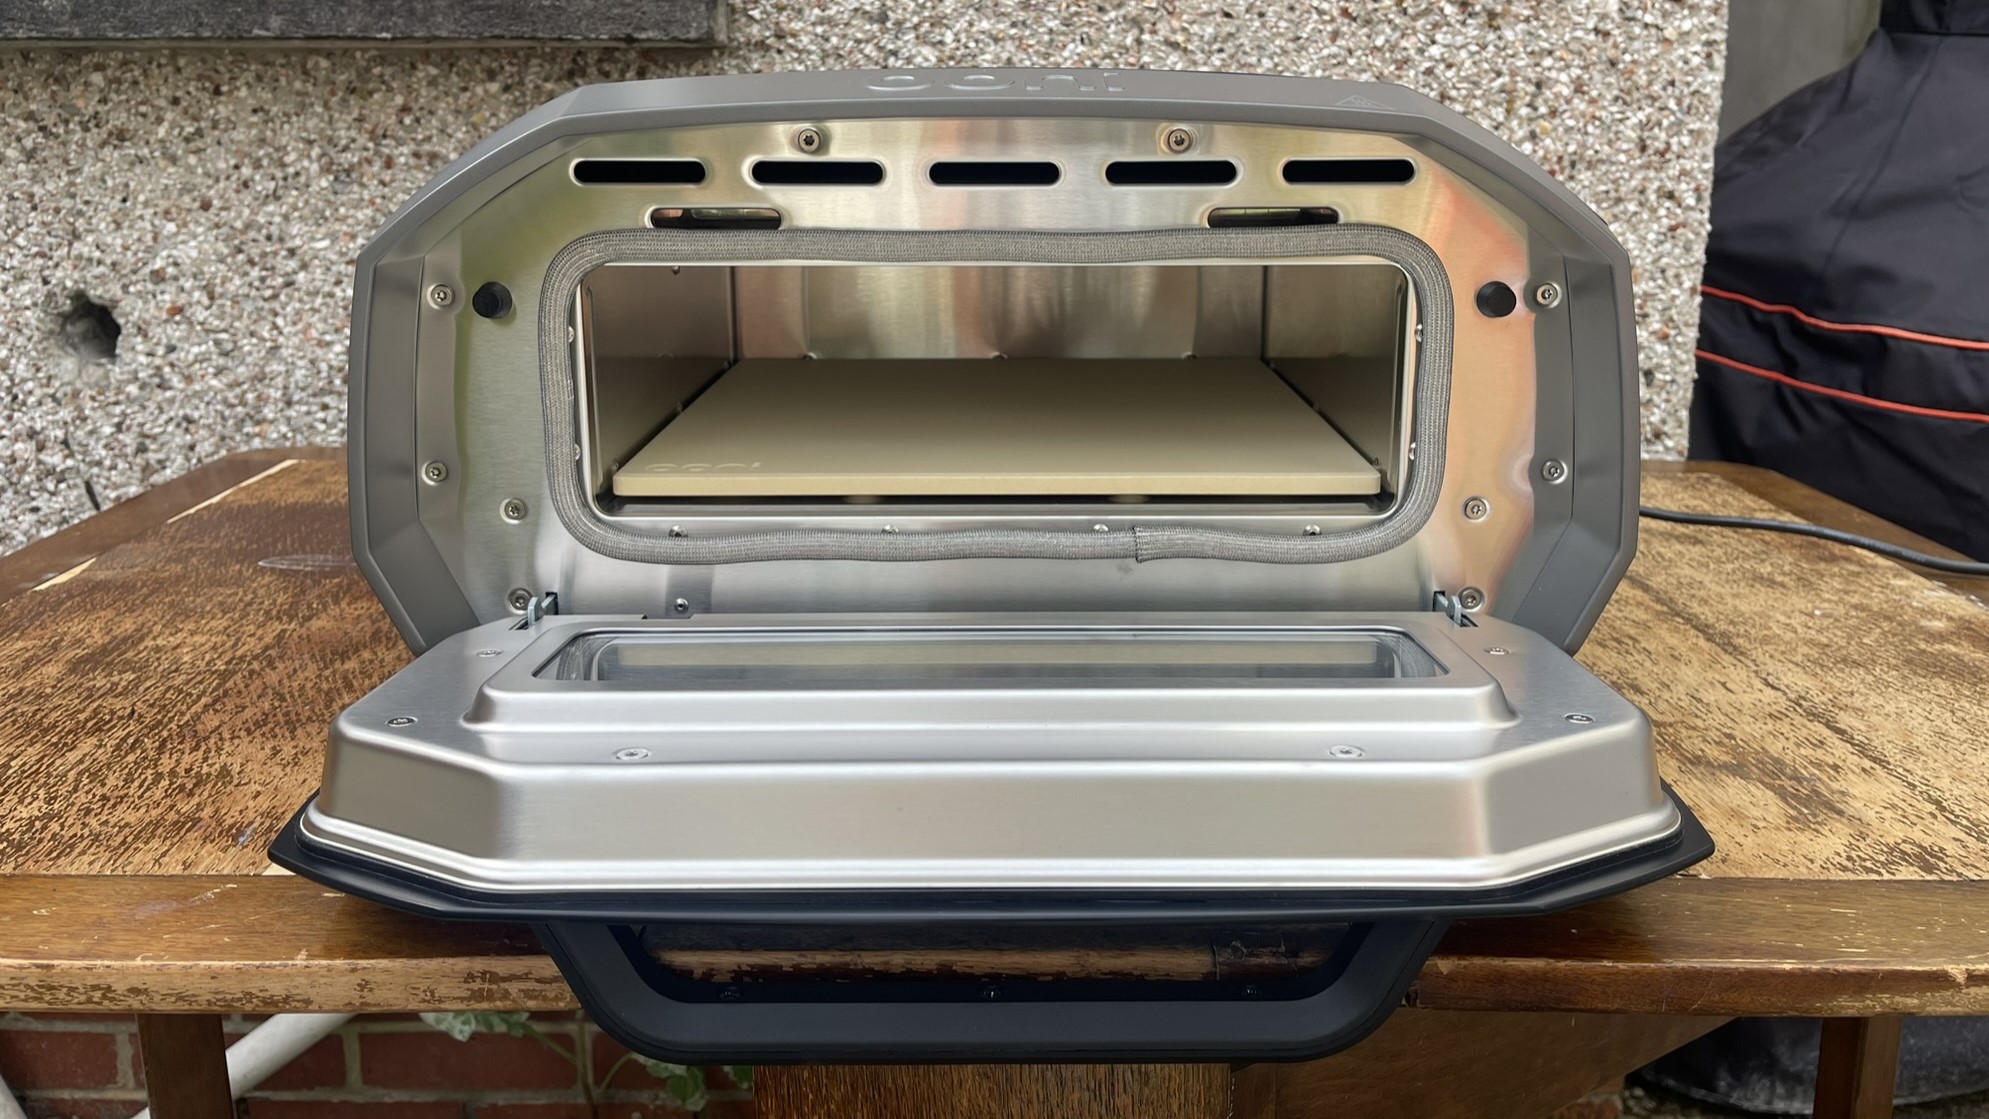 Inside the Ooni Volt 12 pizza oven